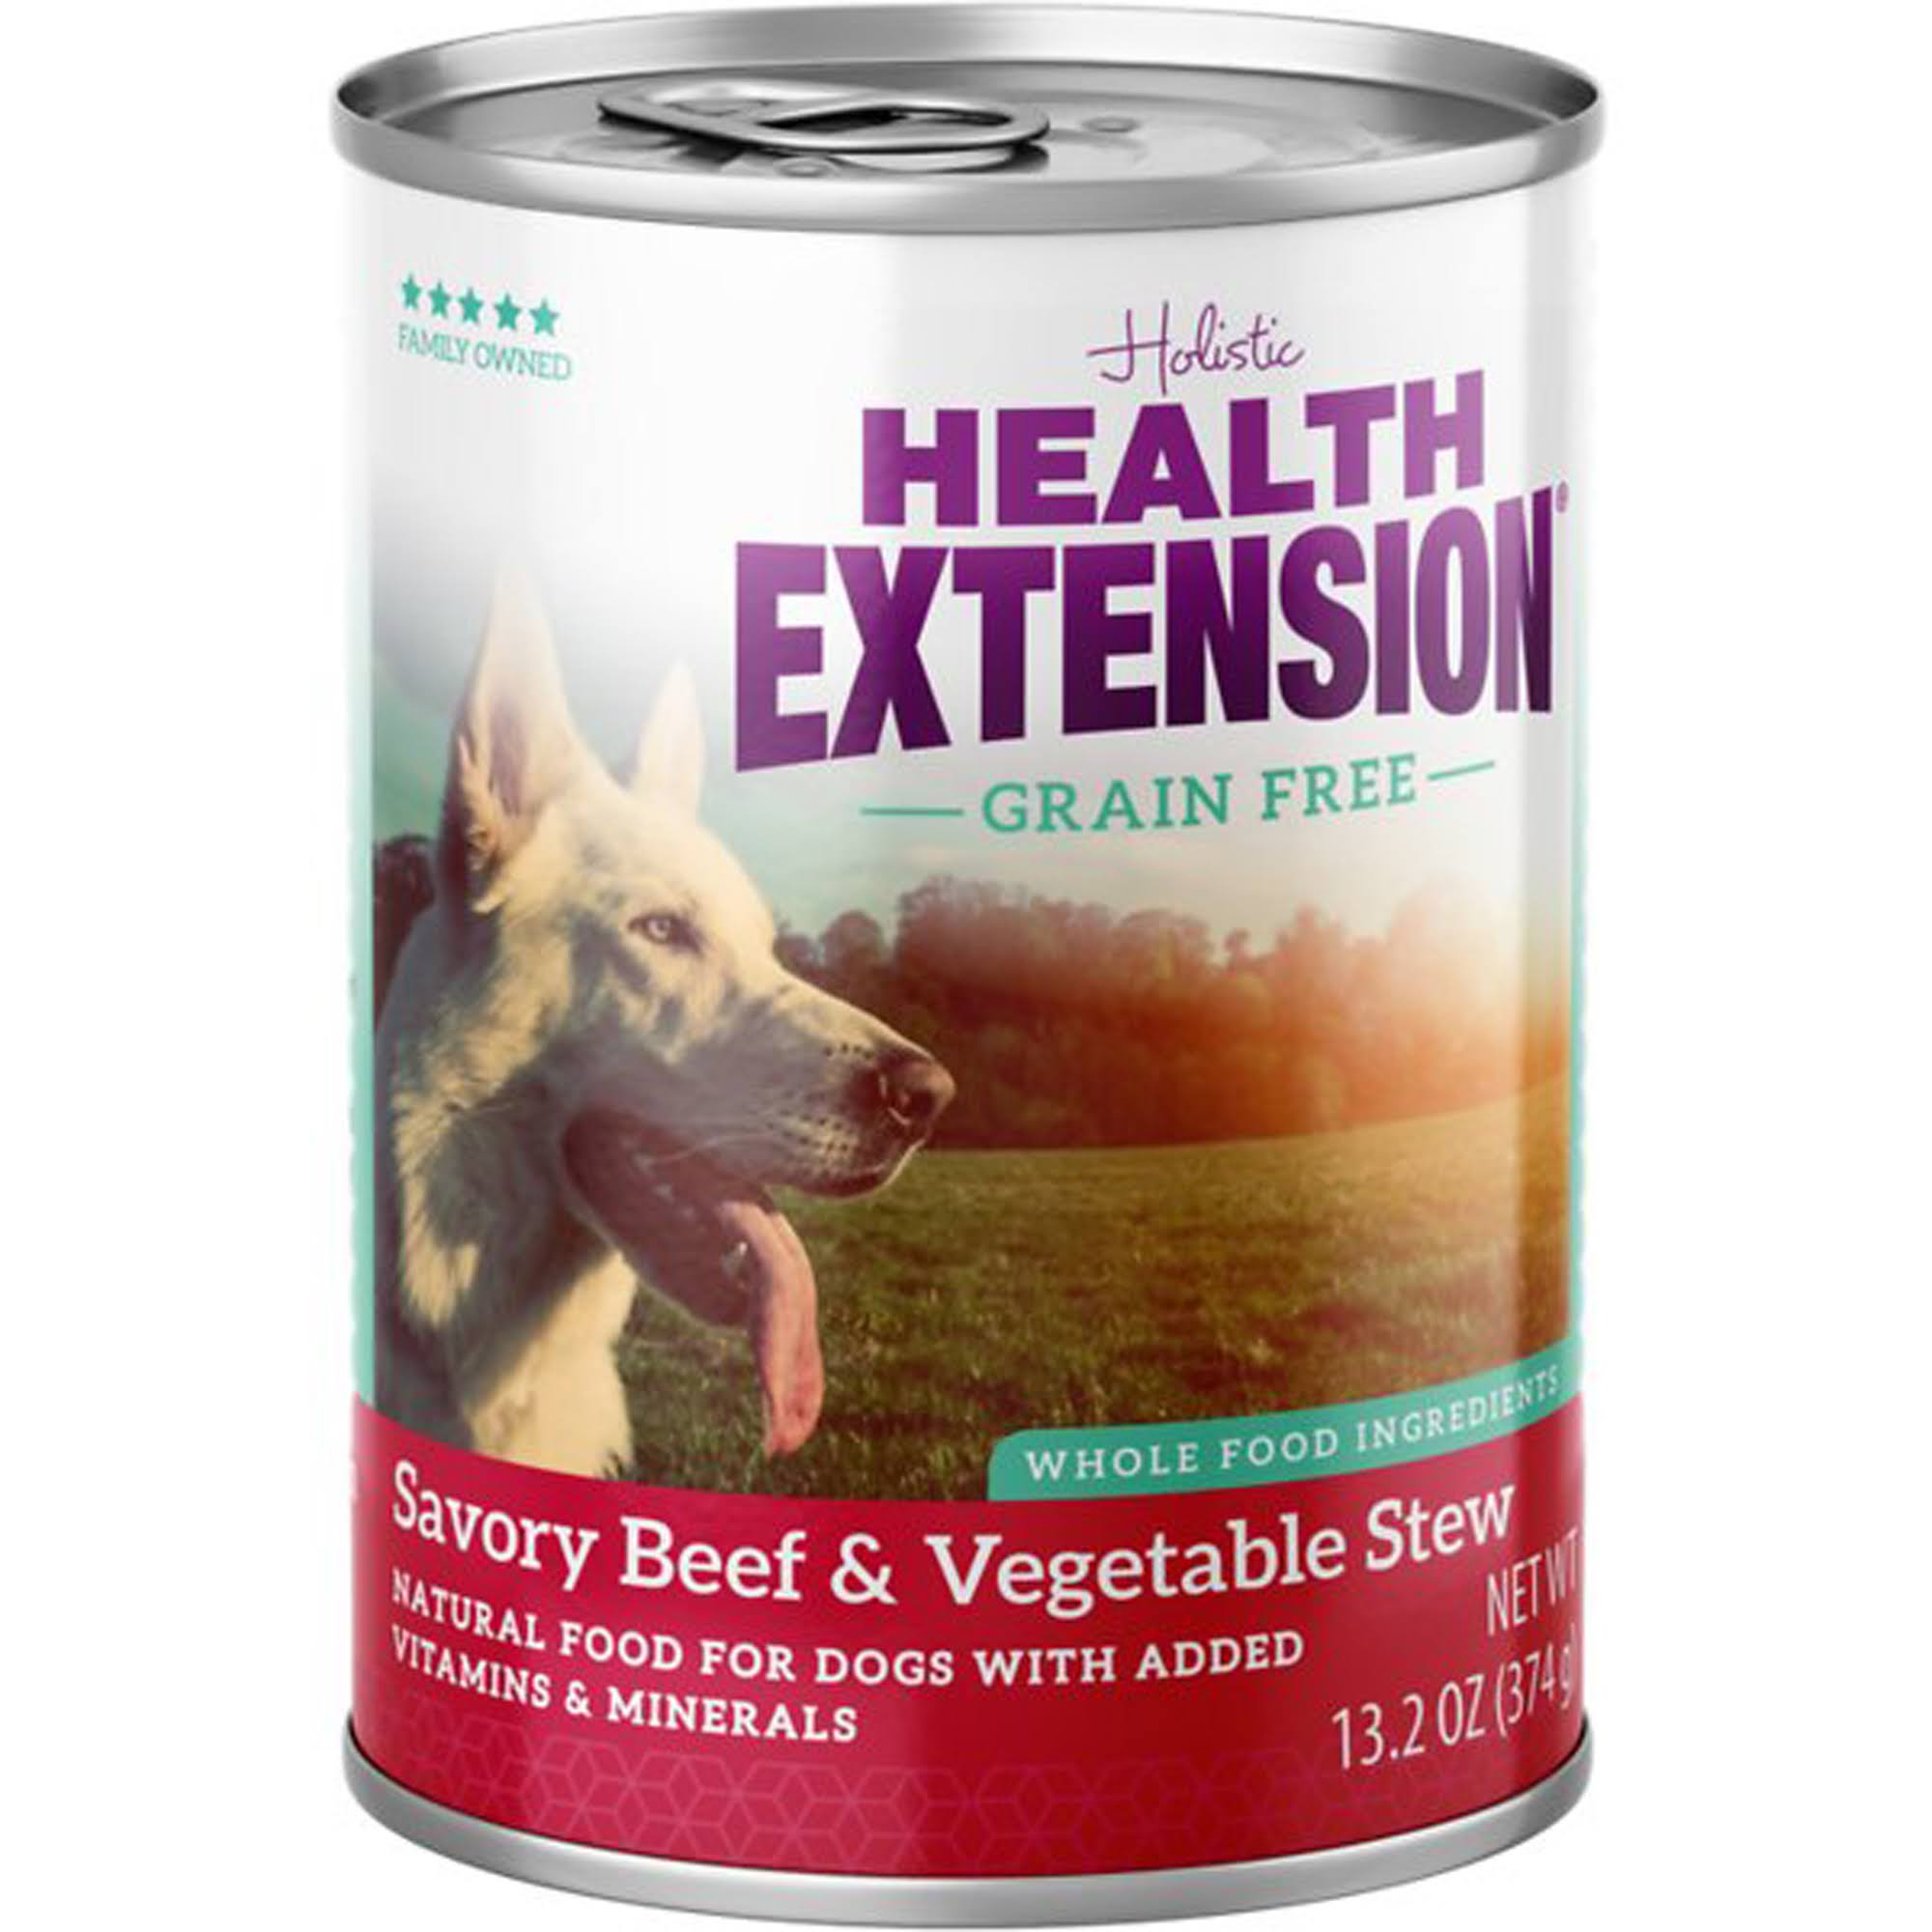 Health Extension Grain Free Savory Beef Stew Canned Dog Food 13.2oz